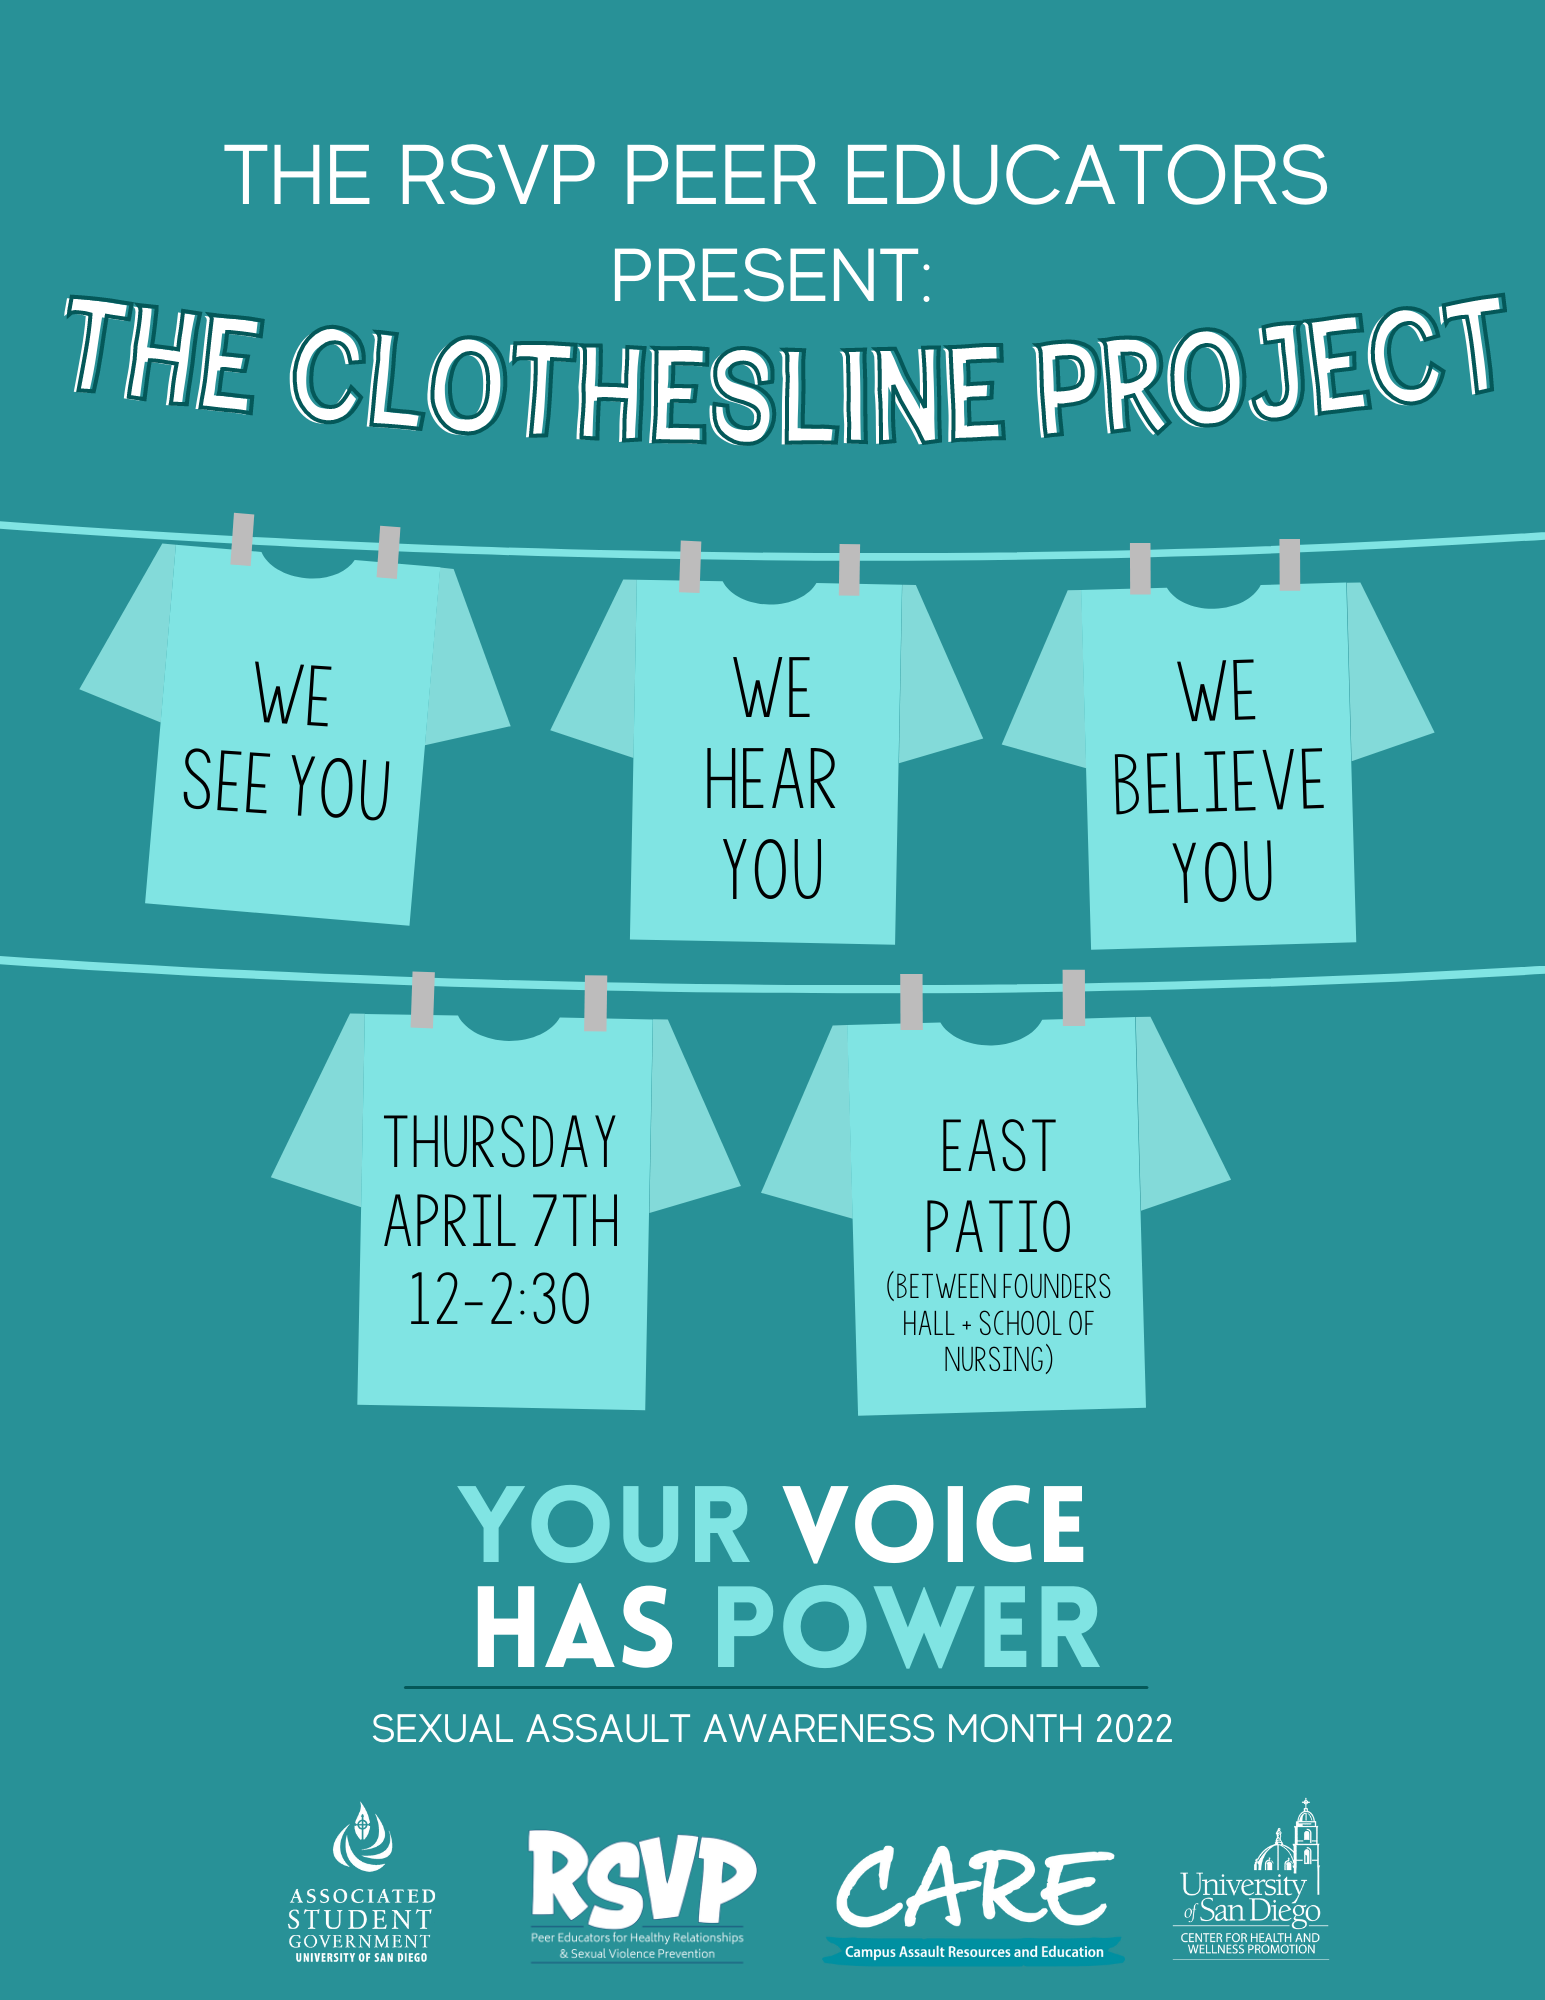 Teal flier with the following information: The RSVP Peer Educators present The Clothesline Project. Thursday, April 7th, 12-2:30, East Patio (between Founders and School of Nursing). Your Voice Has Power; we see you,  we hear you, we believe you.